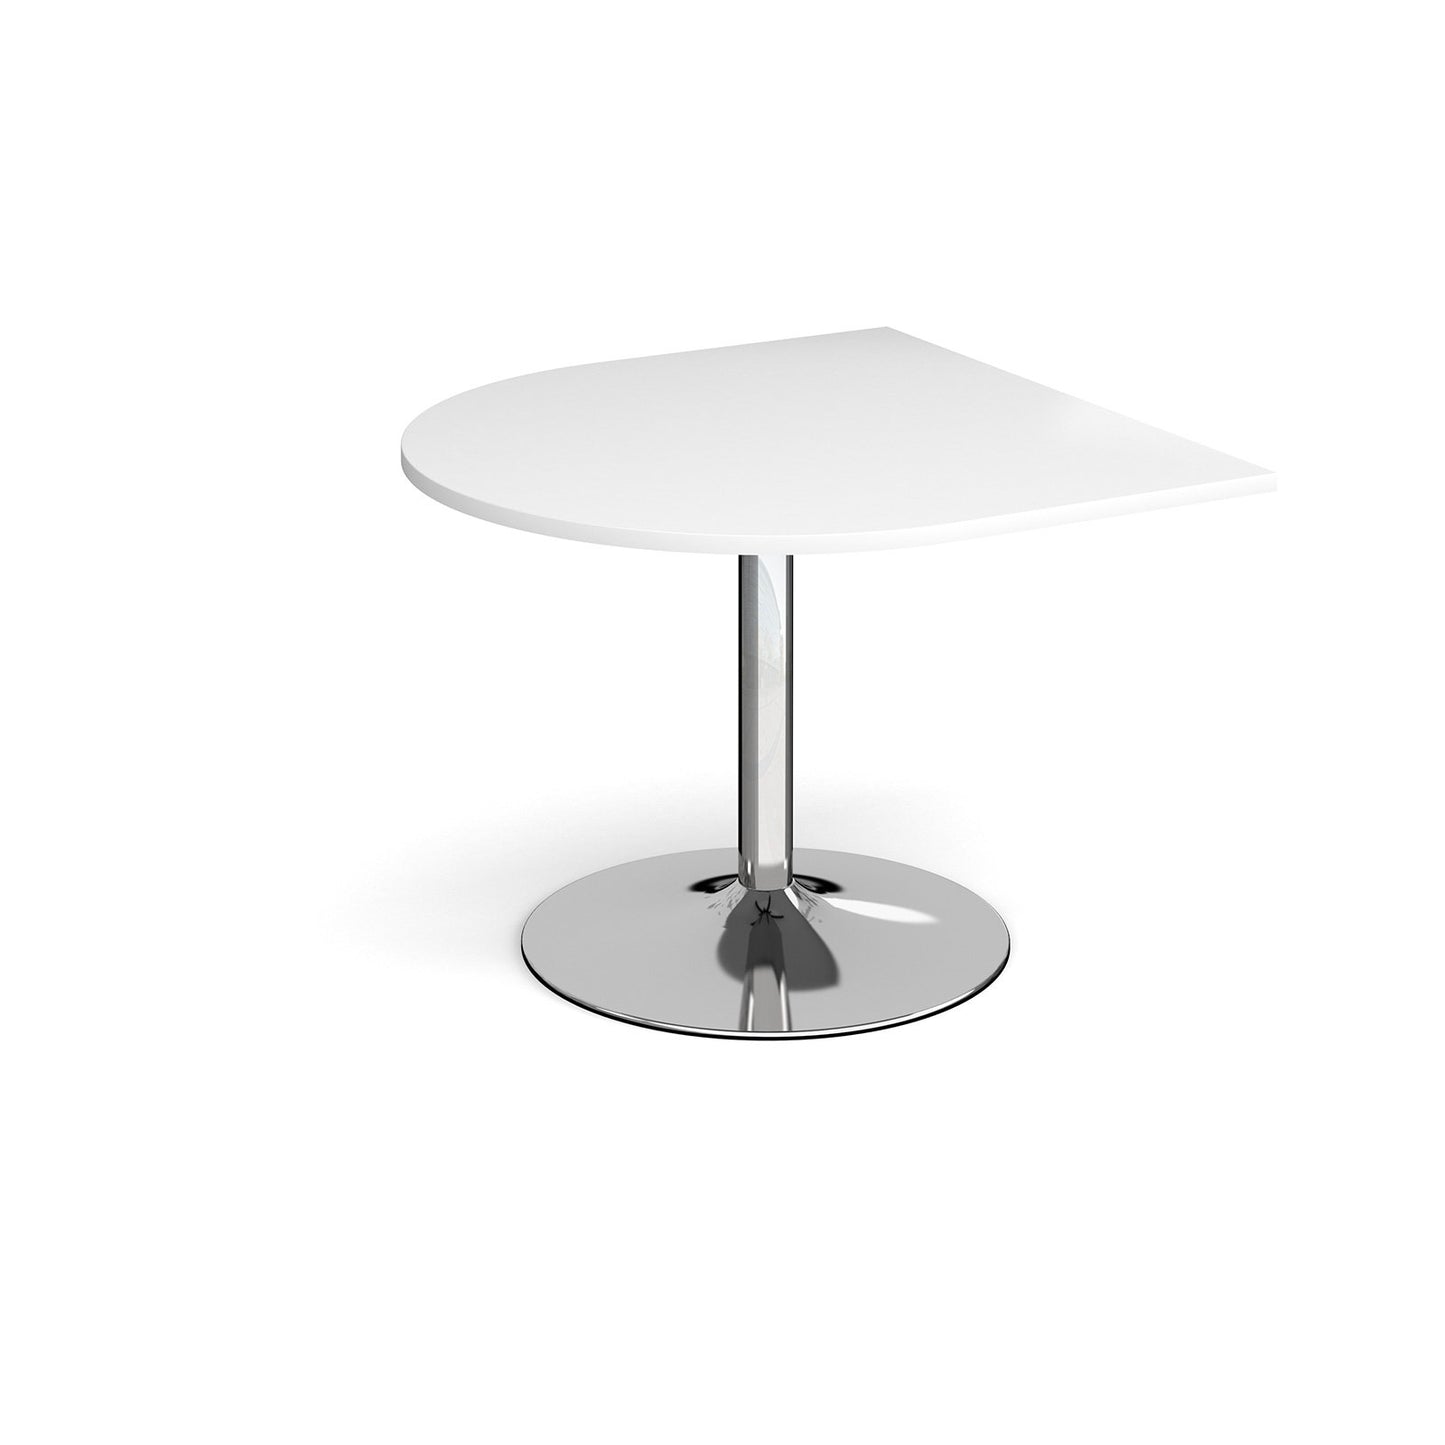 Trumpet base radial extension table